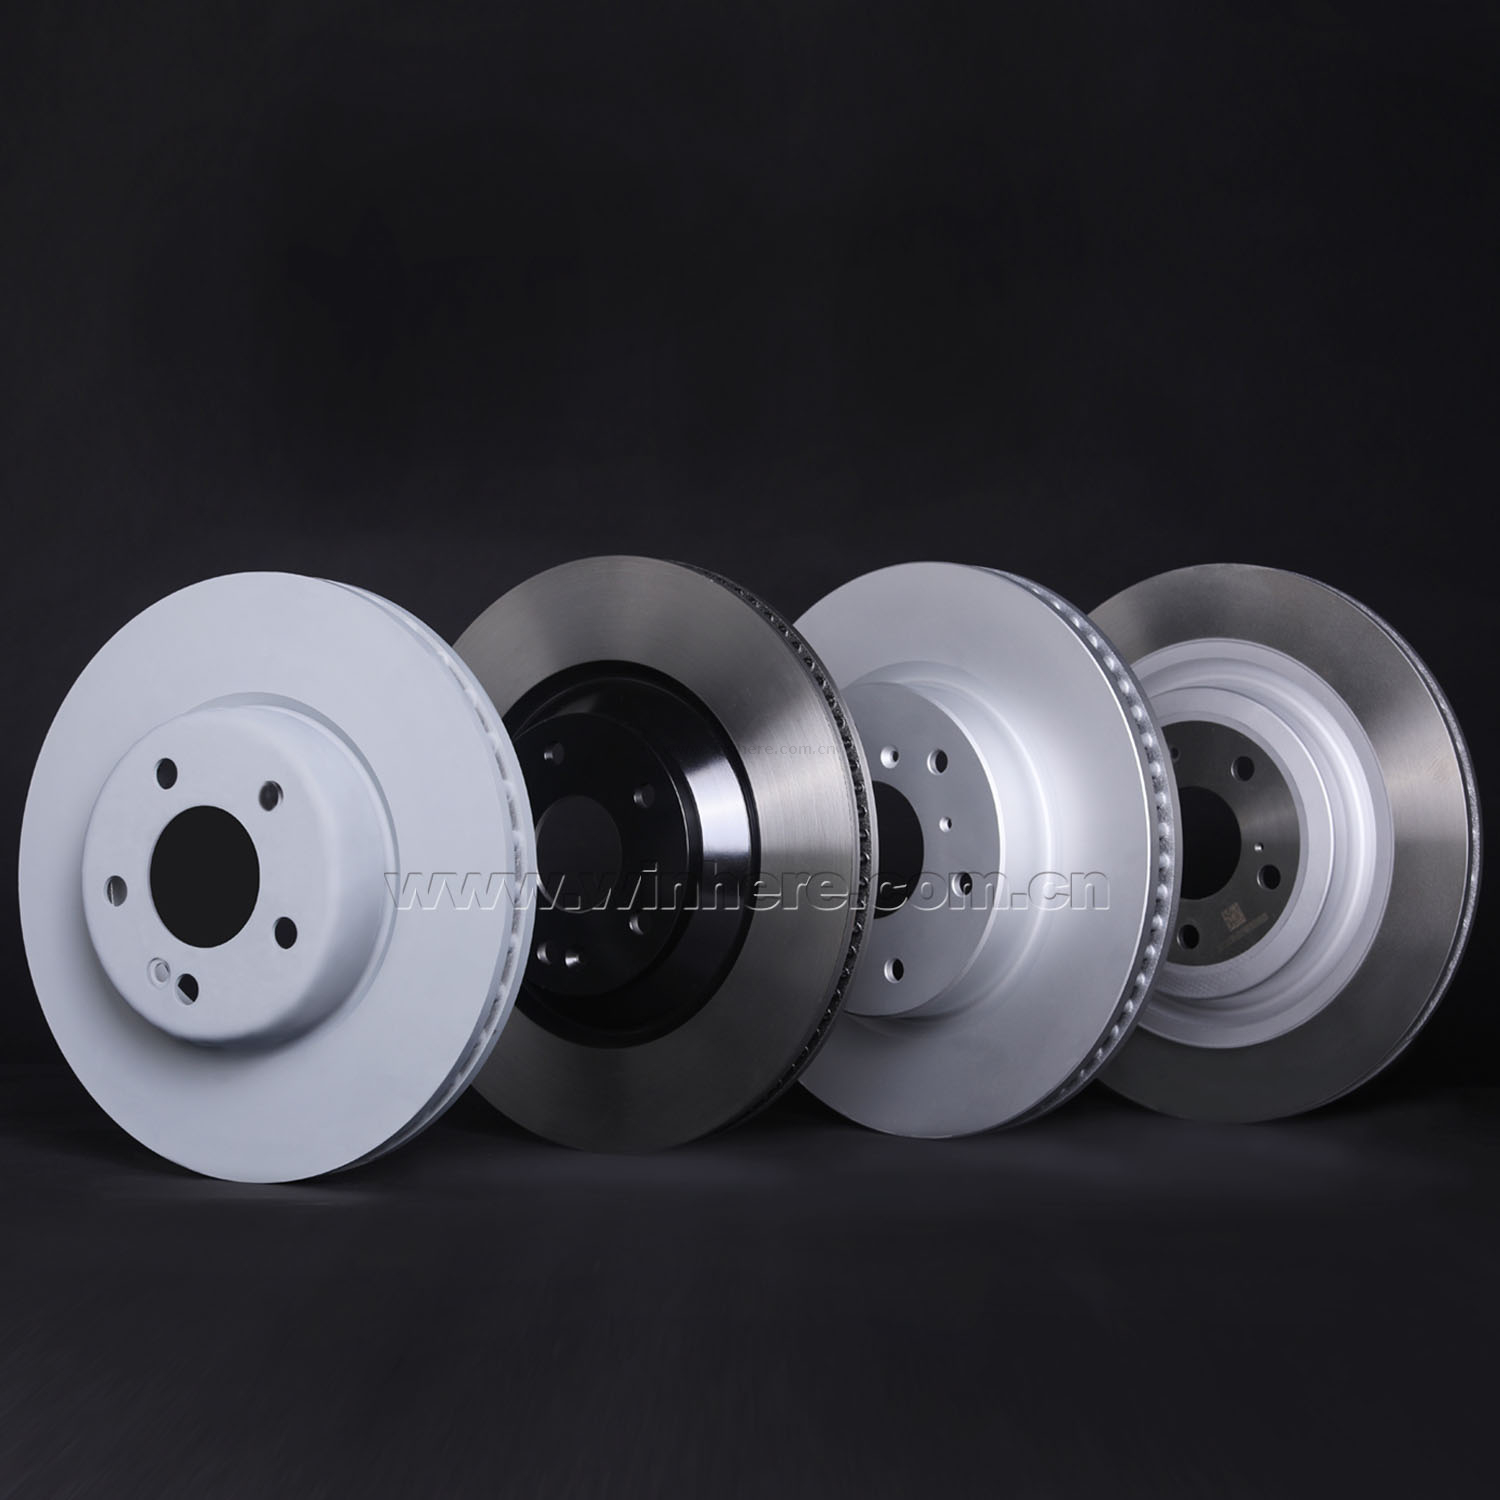 Chevy Drilled Coated Brake Discs